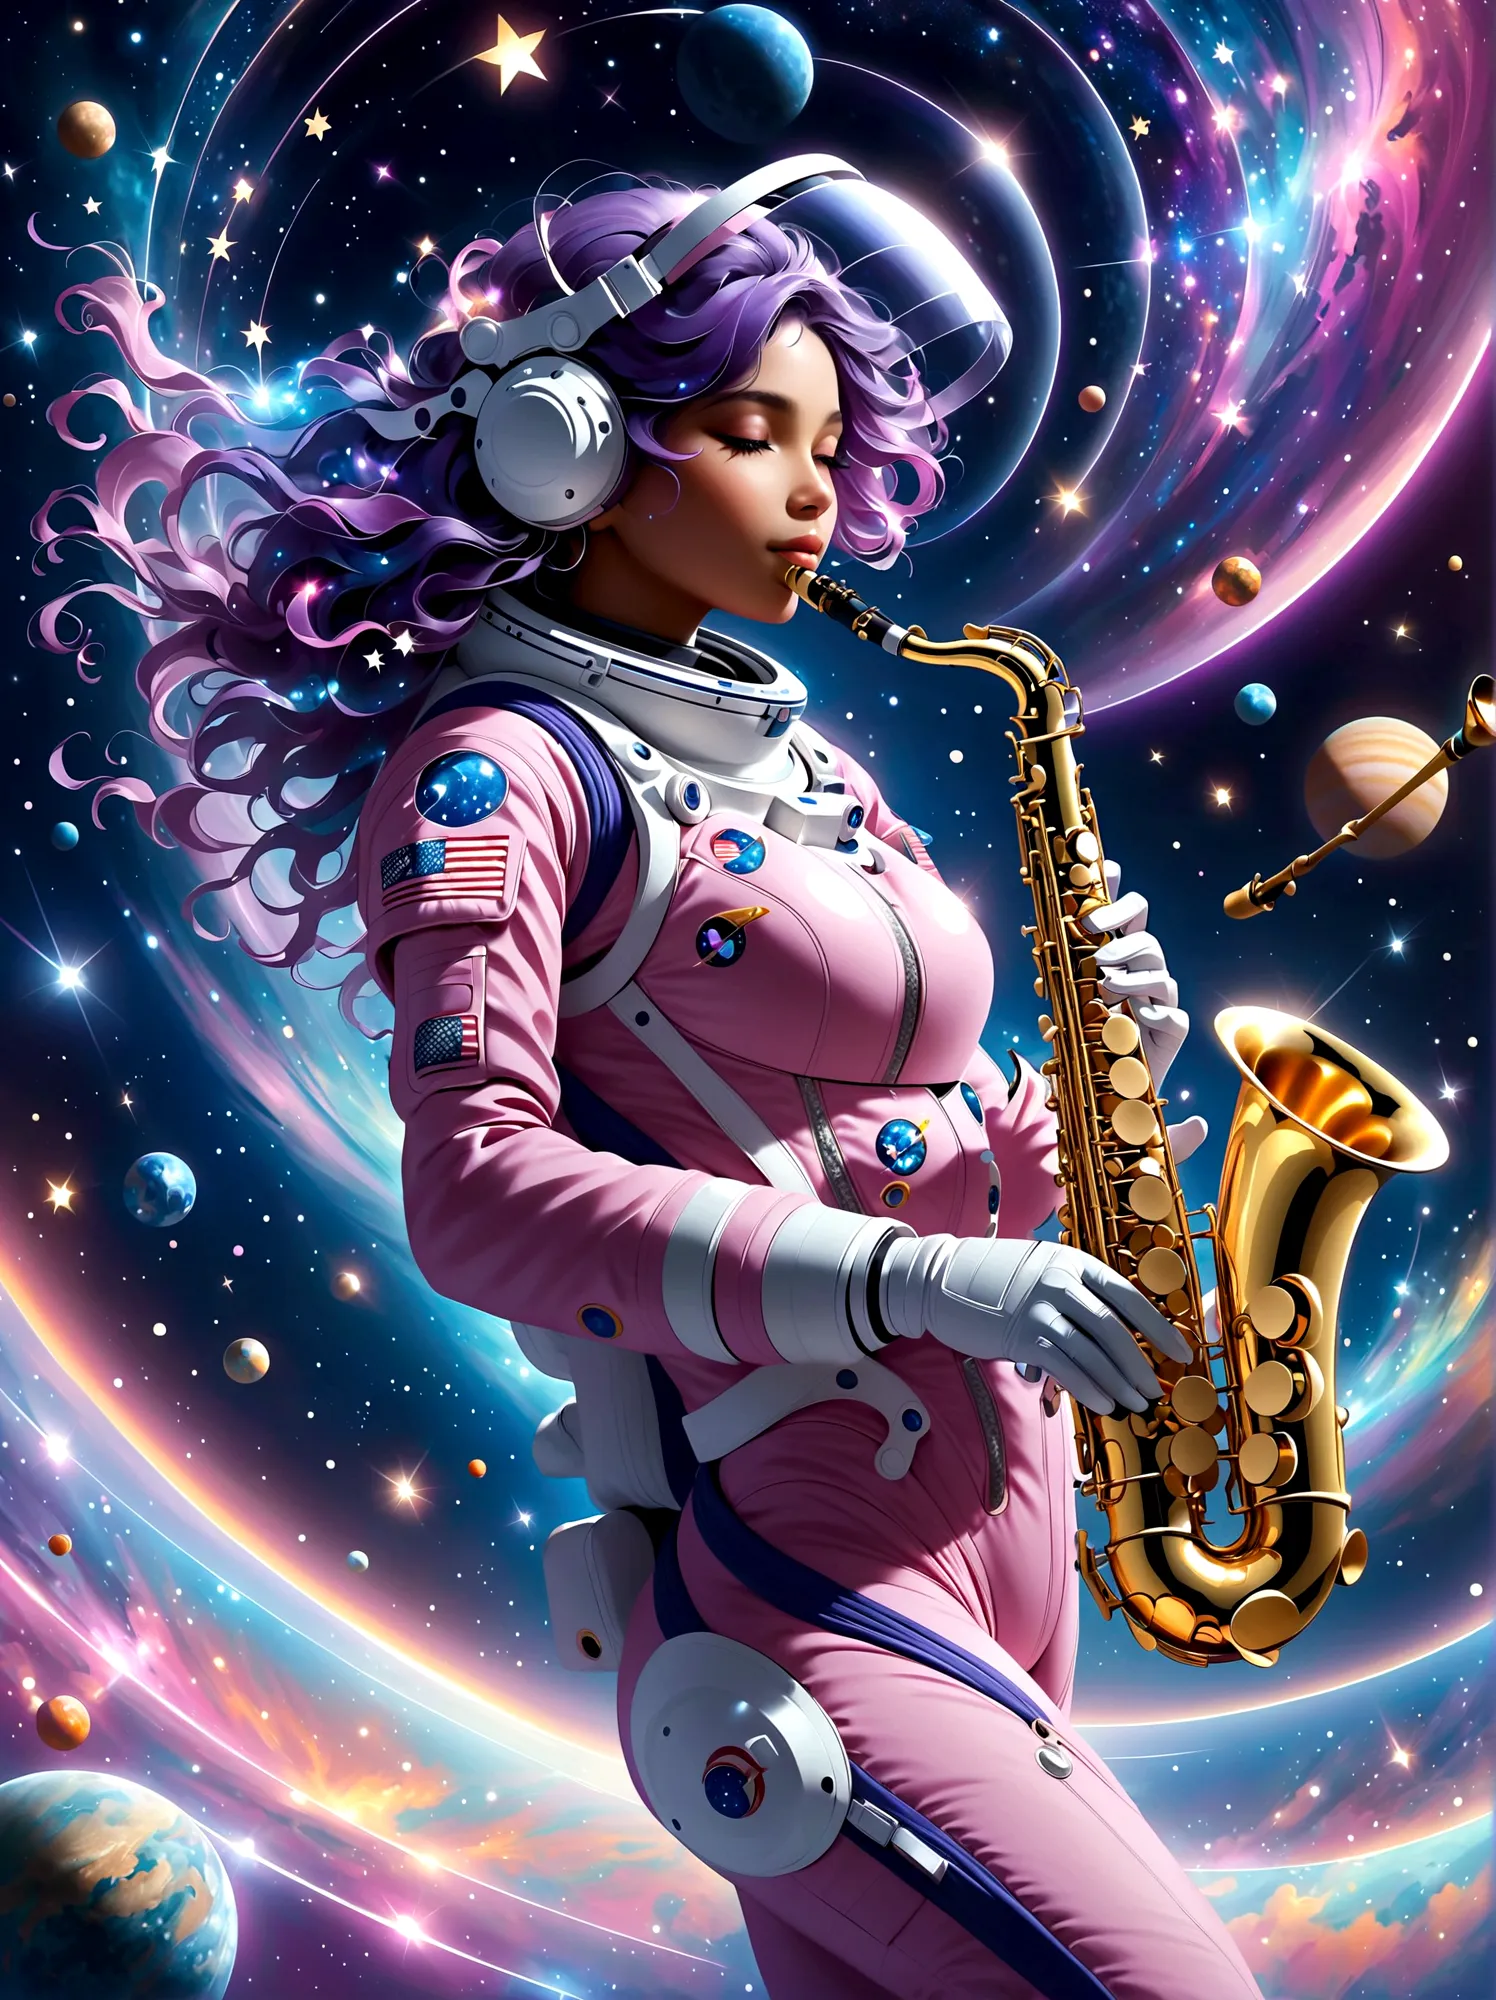 A futuristic visual of an astronaut playing a shining silver saxophone, floating amid the cosmos. The astronaut is a South Asian...